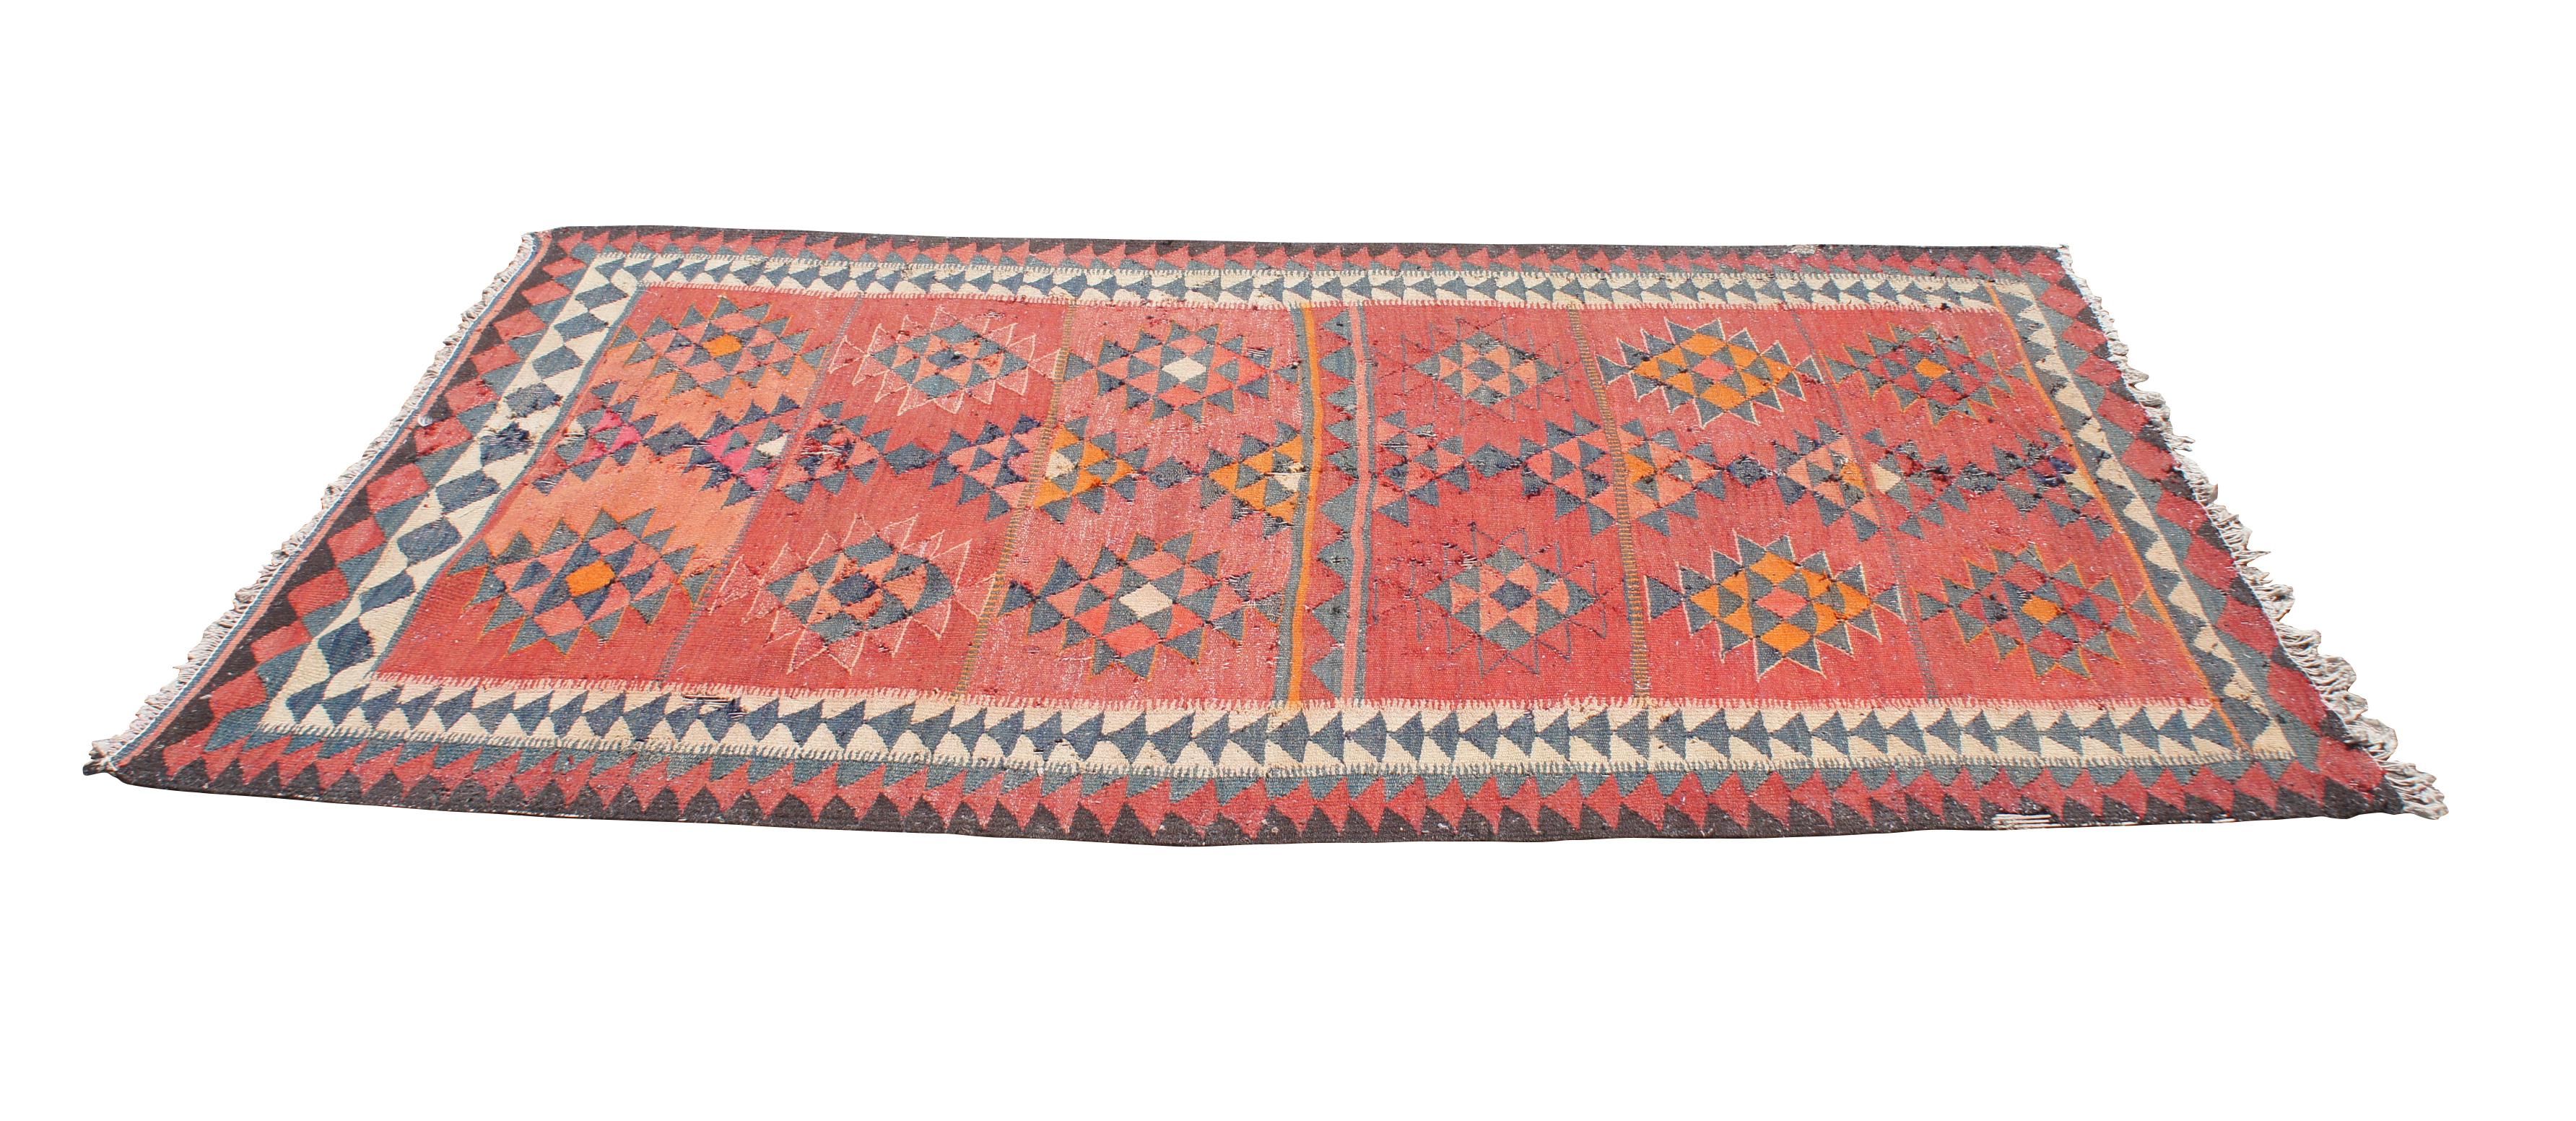 A colorful Turkish kilim rug runner from the second half of the 20th century.  Made from wool in Oushak (western) Turkey.  Features a geometric pattern in red, blue orange and beige.  Ushaks are flat-woven rugs that are on the thinner side of the